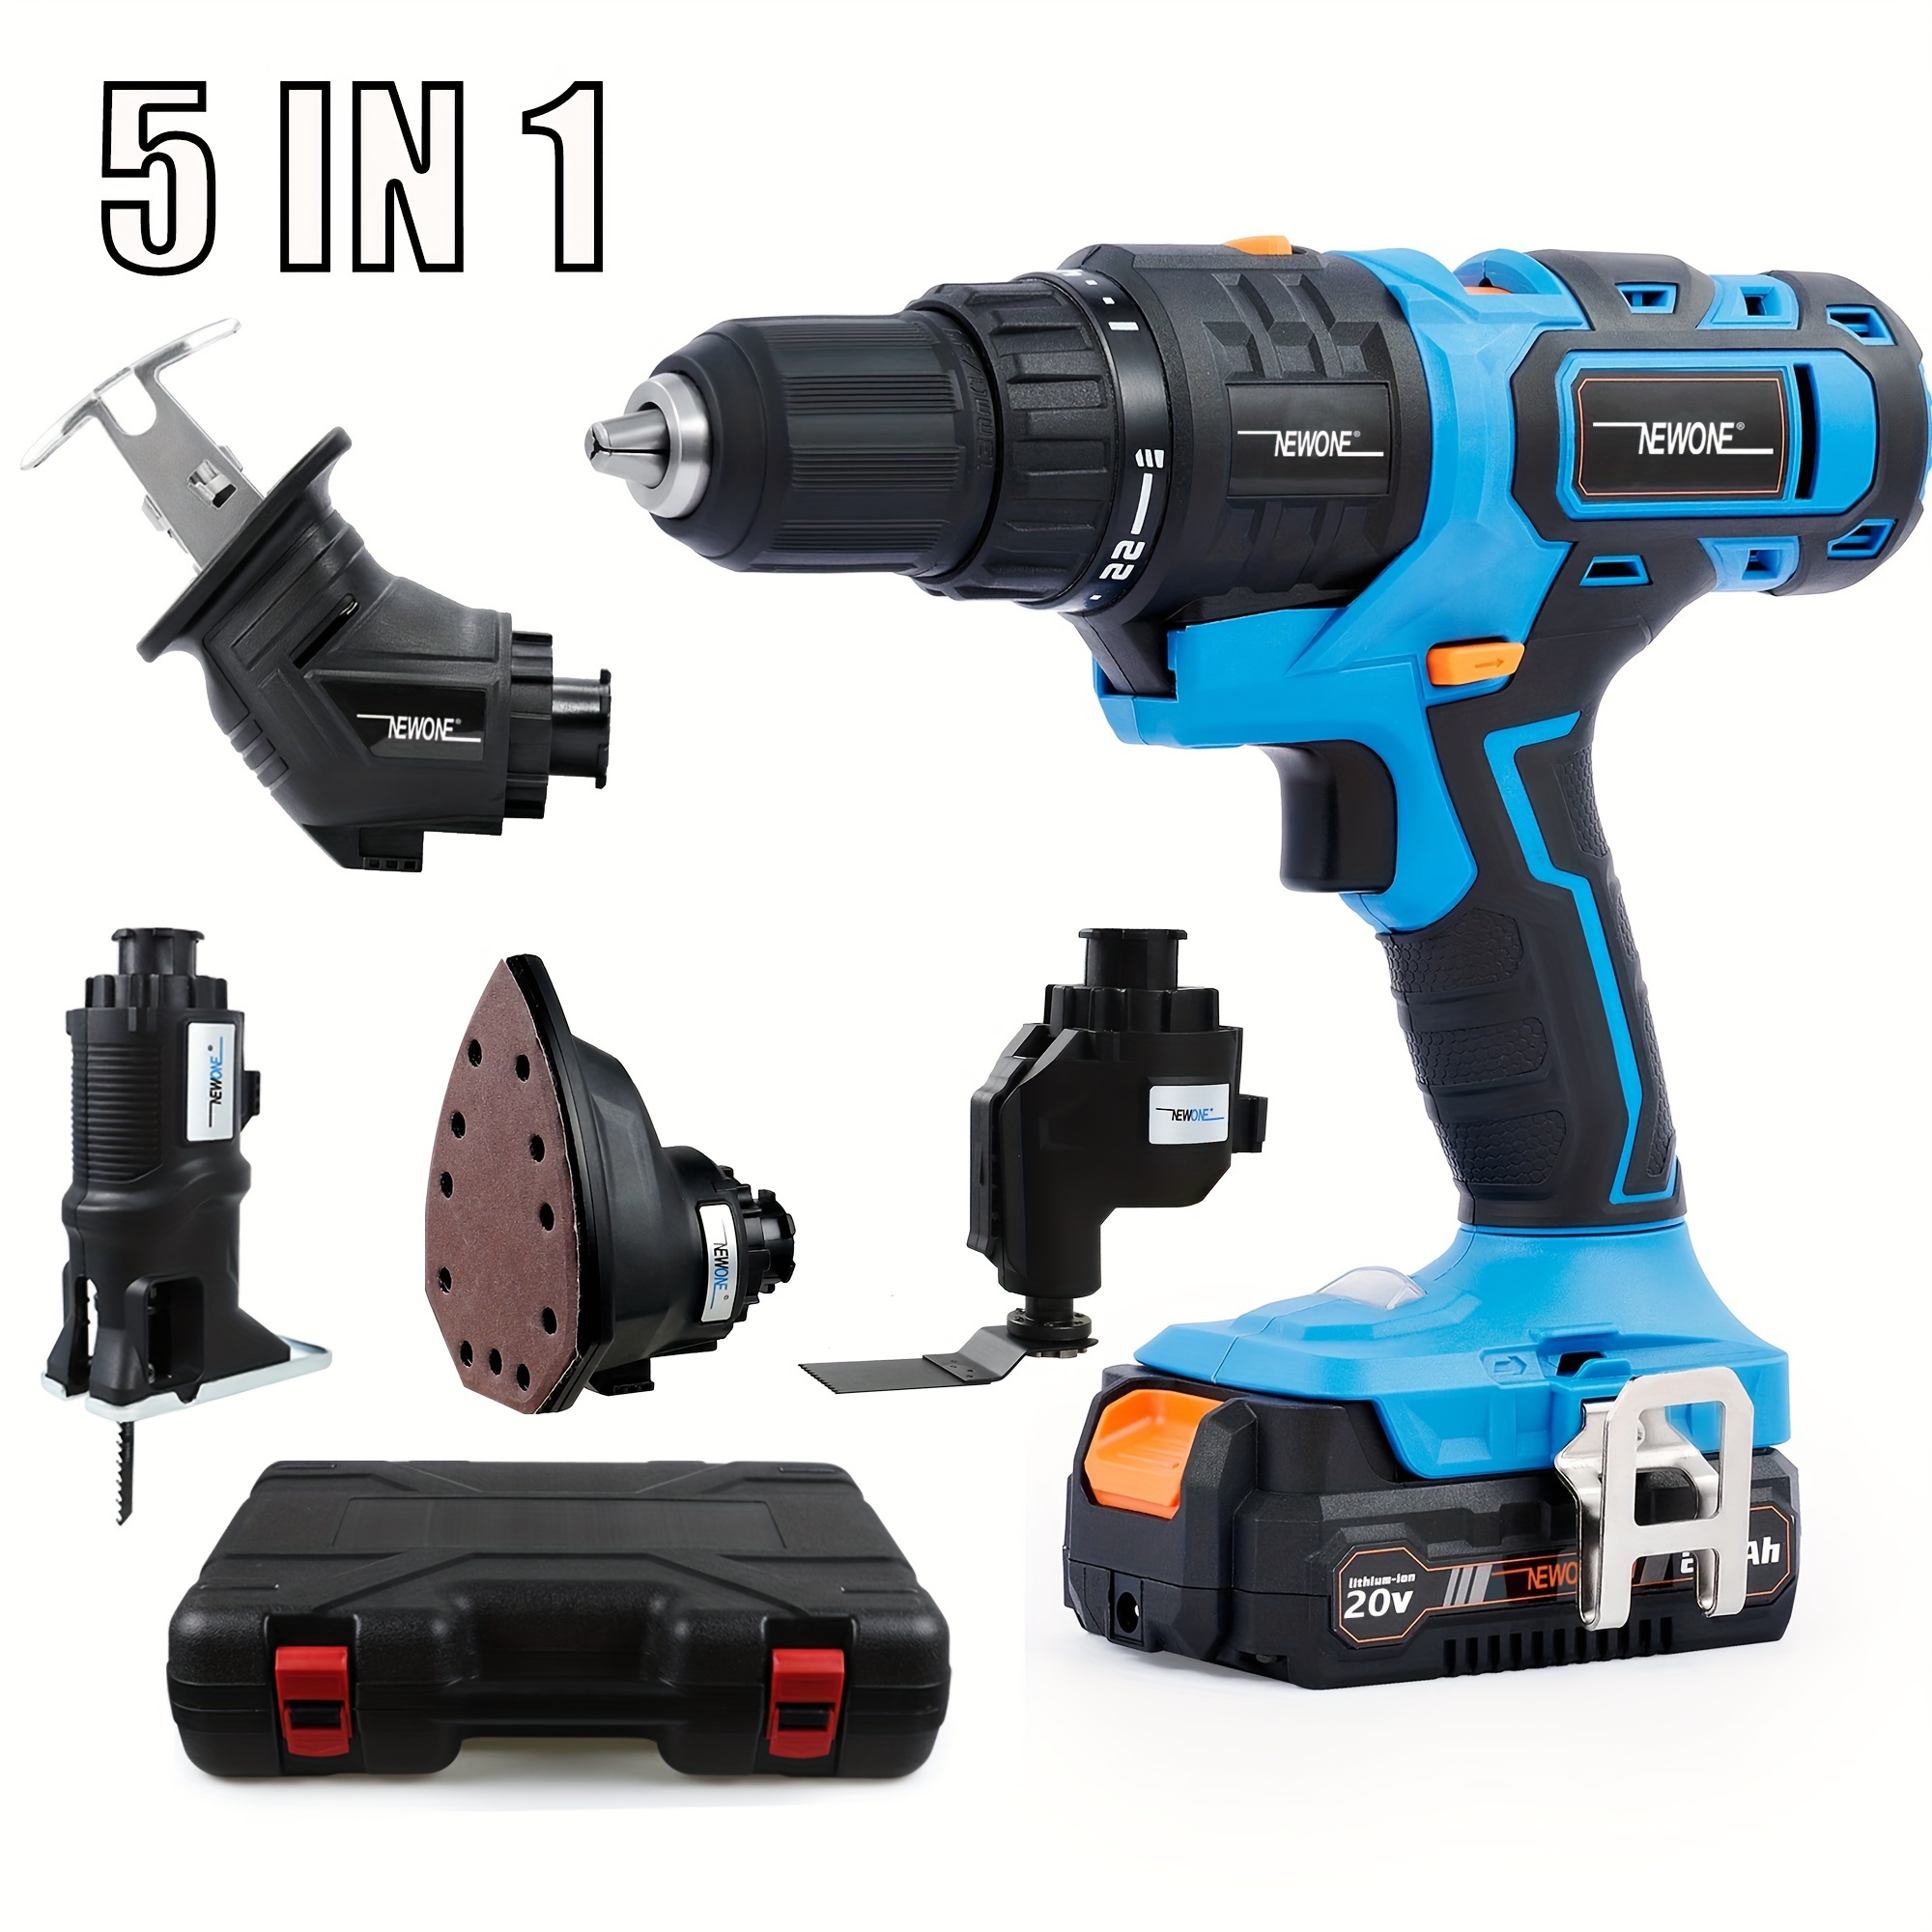 

Newone 20v Cordless Combo Kit 5- Combo Kit With Case Drill Saw Jig Saw Oscillating Tool Sander With Accessories 2.0ah Lionthium Battery And Charger